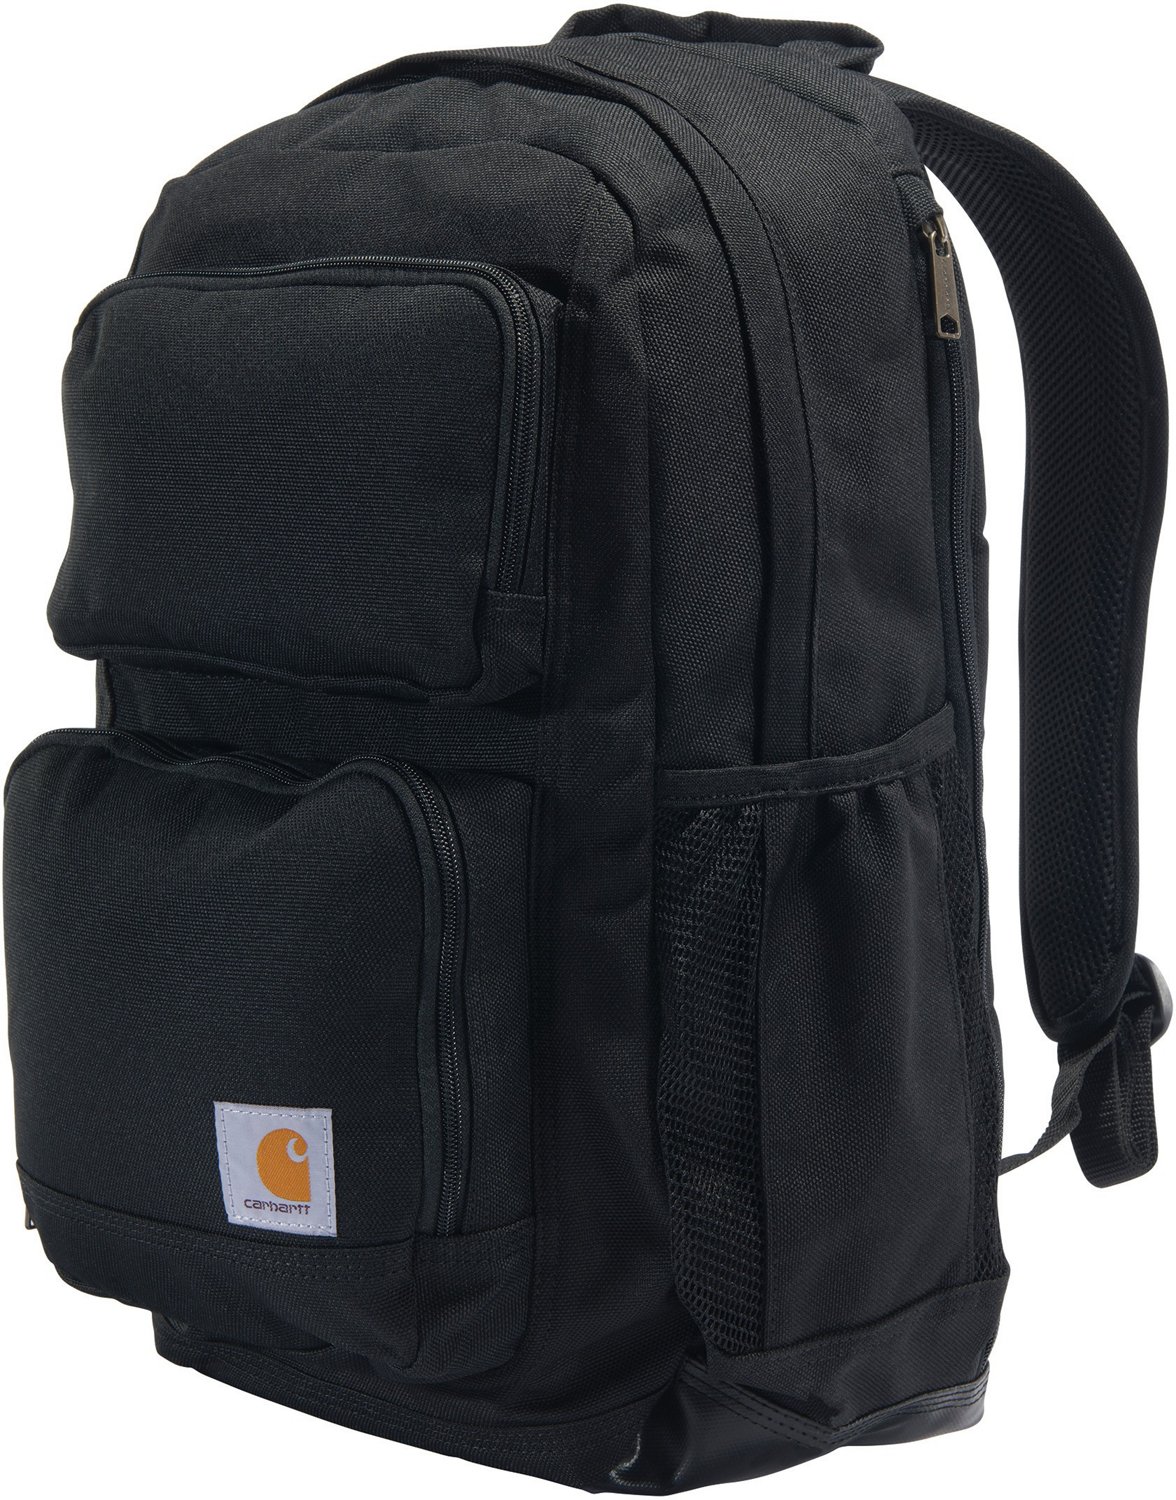 Carhartt 28 L Dual-Compartment Backpack | Academy